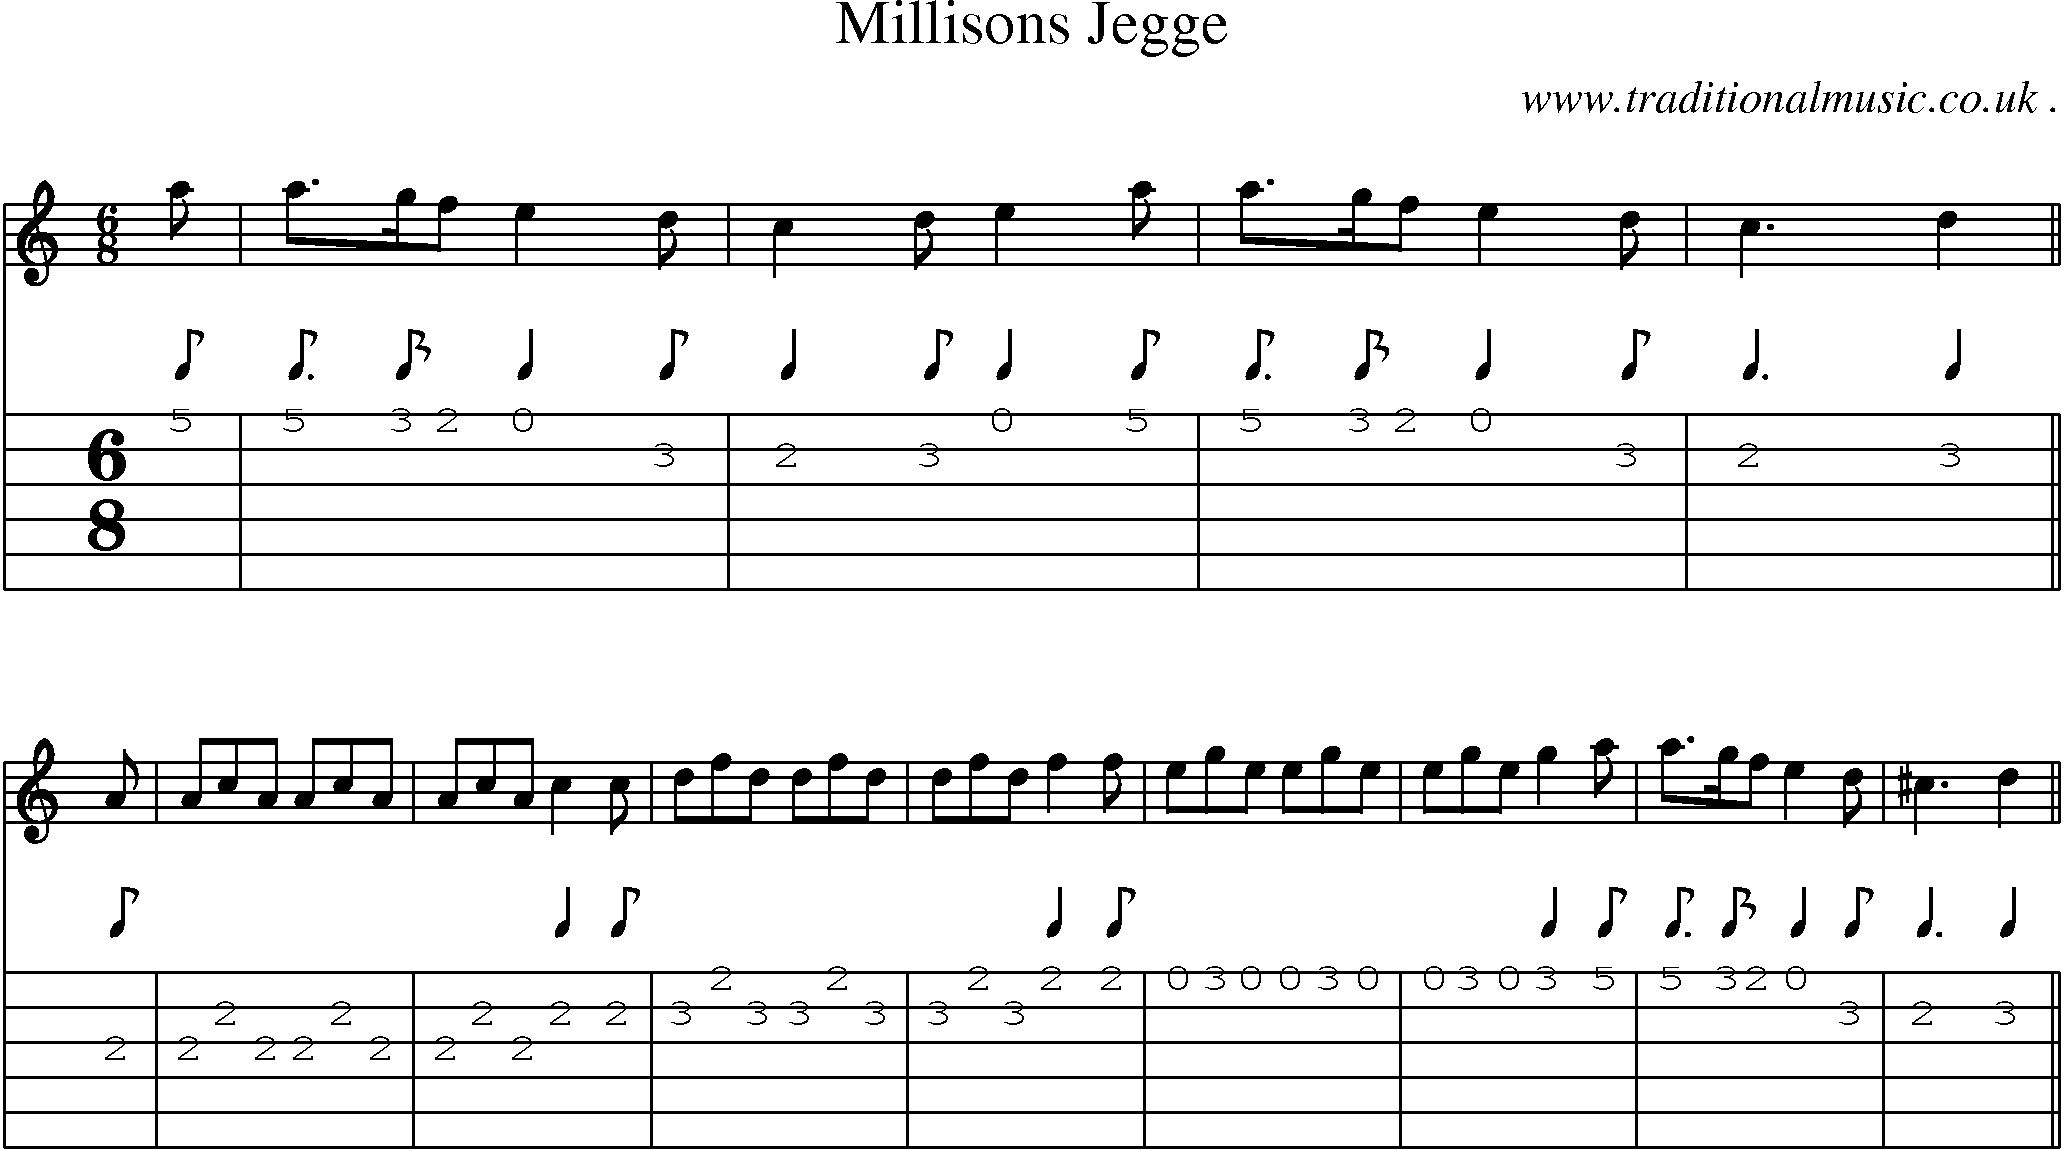 Sheet-music  score, Chords and Guitar Tabs for Millisons Jegge